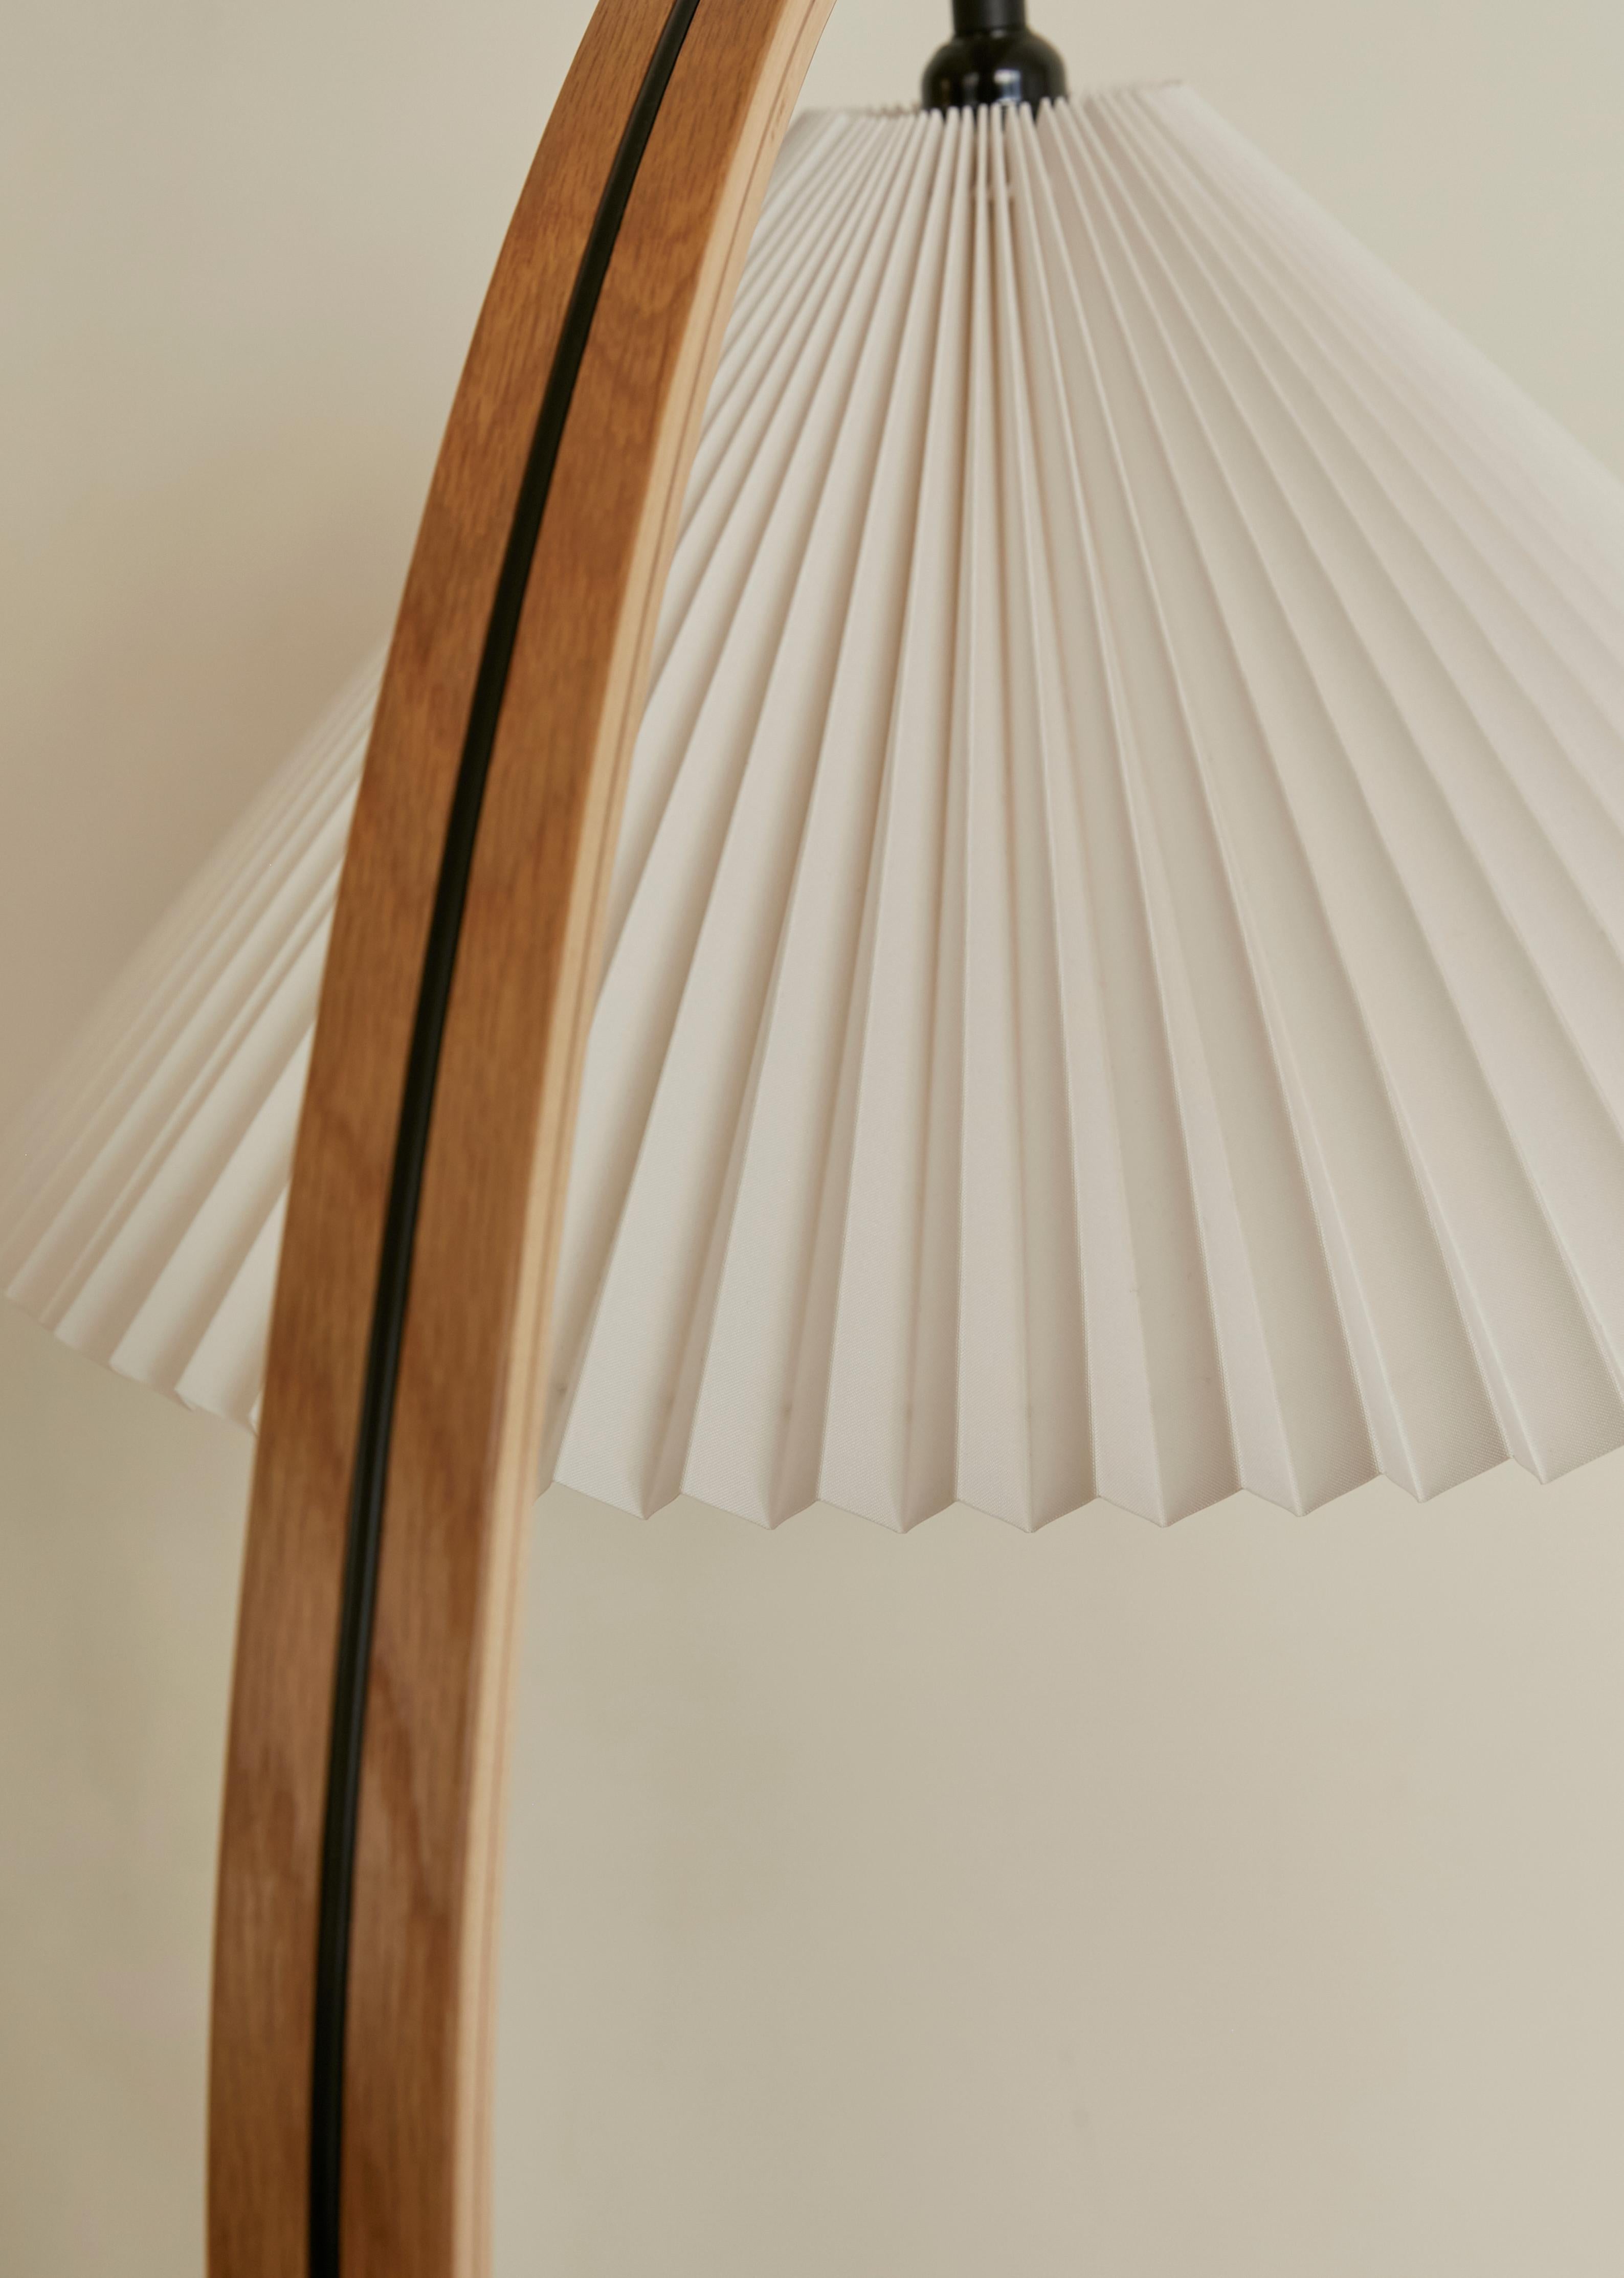 Timberline floor lamp by Gubi, 1970's by Mads Caprani. Scandinavian design In Excellent Condition For Sale In MADRID, ES